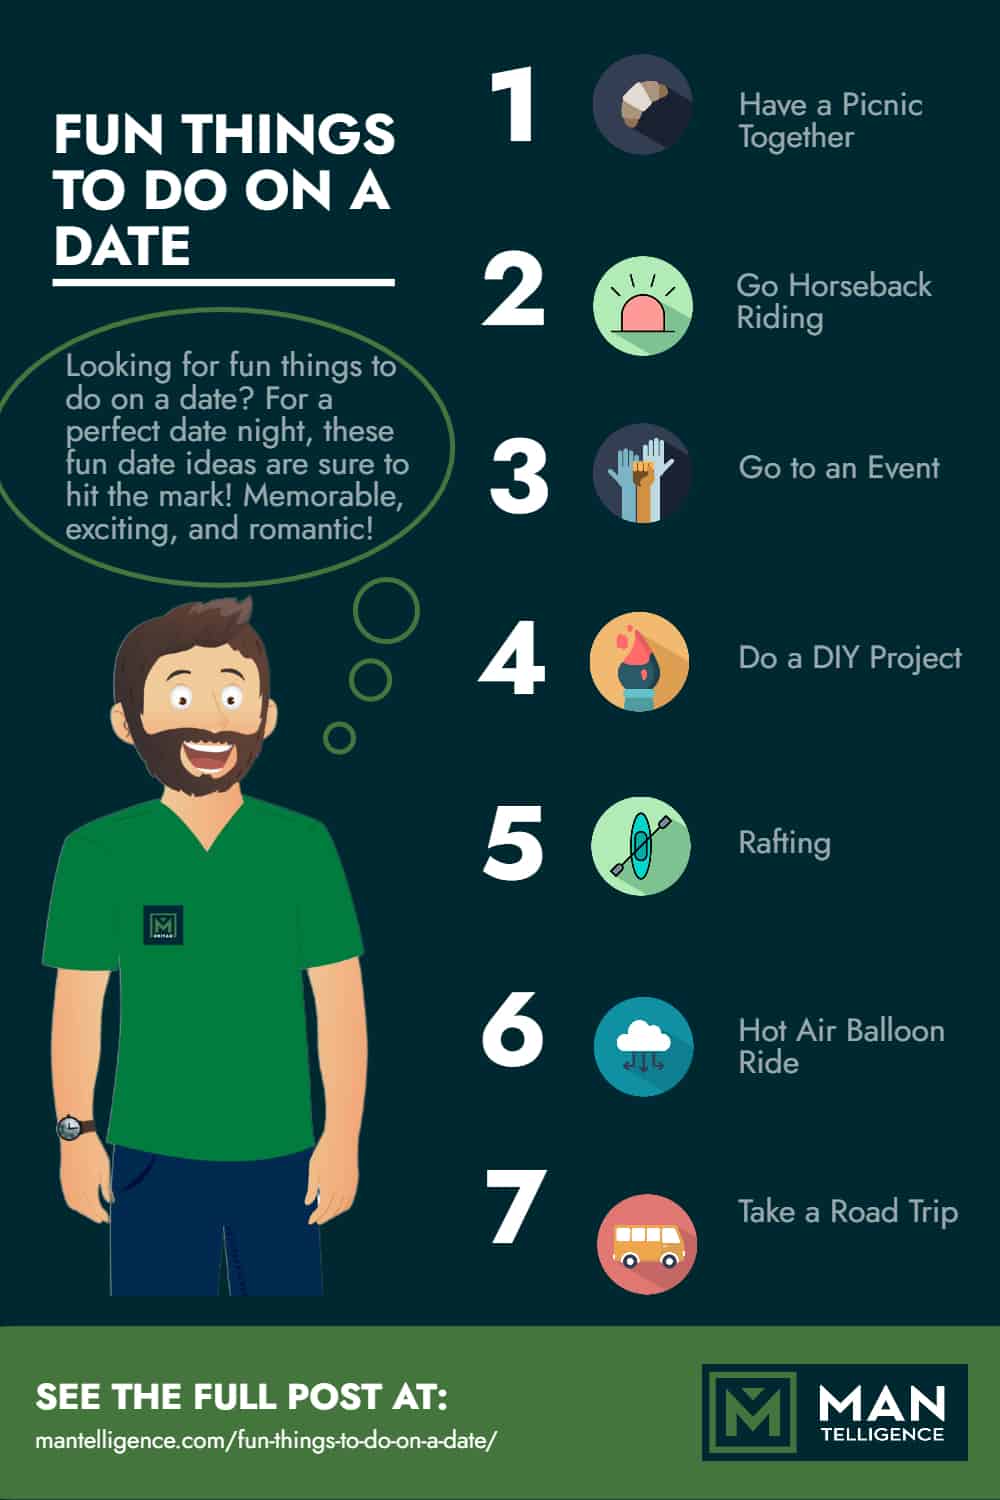 Fun Things to do on a Date - Infographic